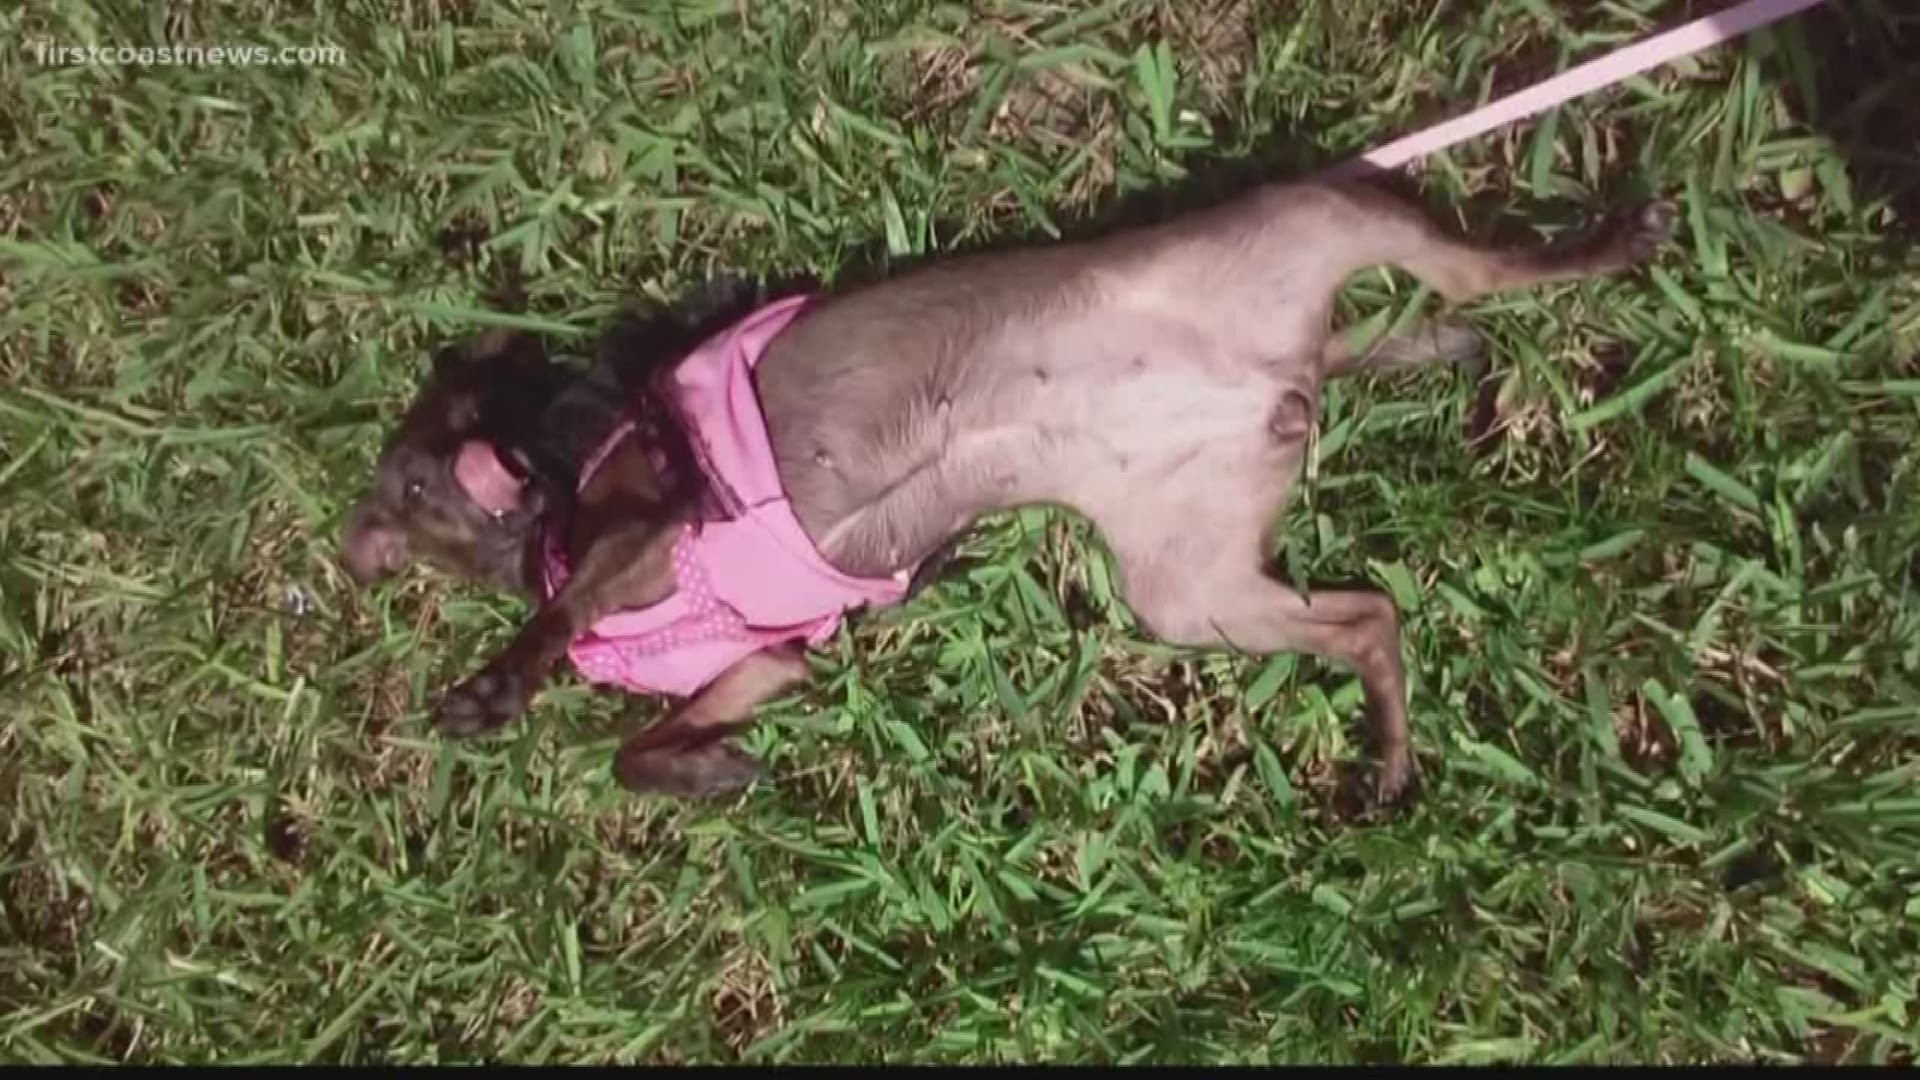 After a deadly dog attack took the life of a chihuahua named "Peanut" on Jacksonville's southside last week, it's important for pet owners to understand animal control laws and how they can differ from city to city.